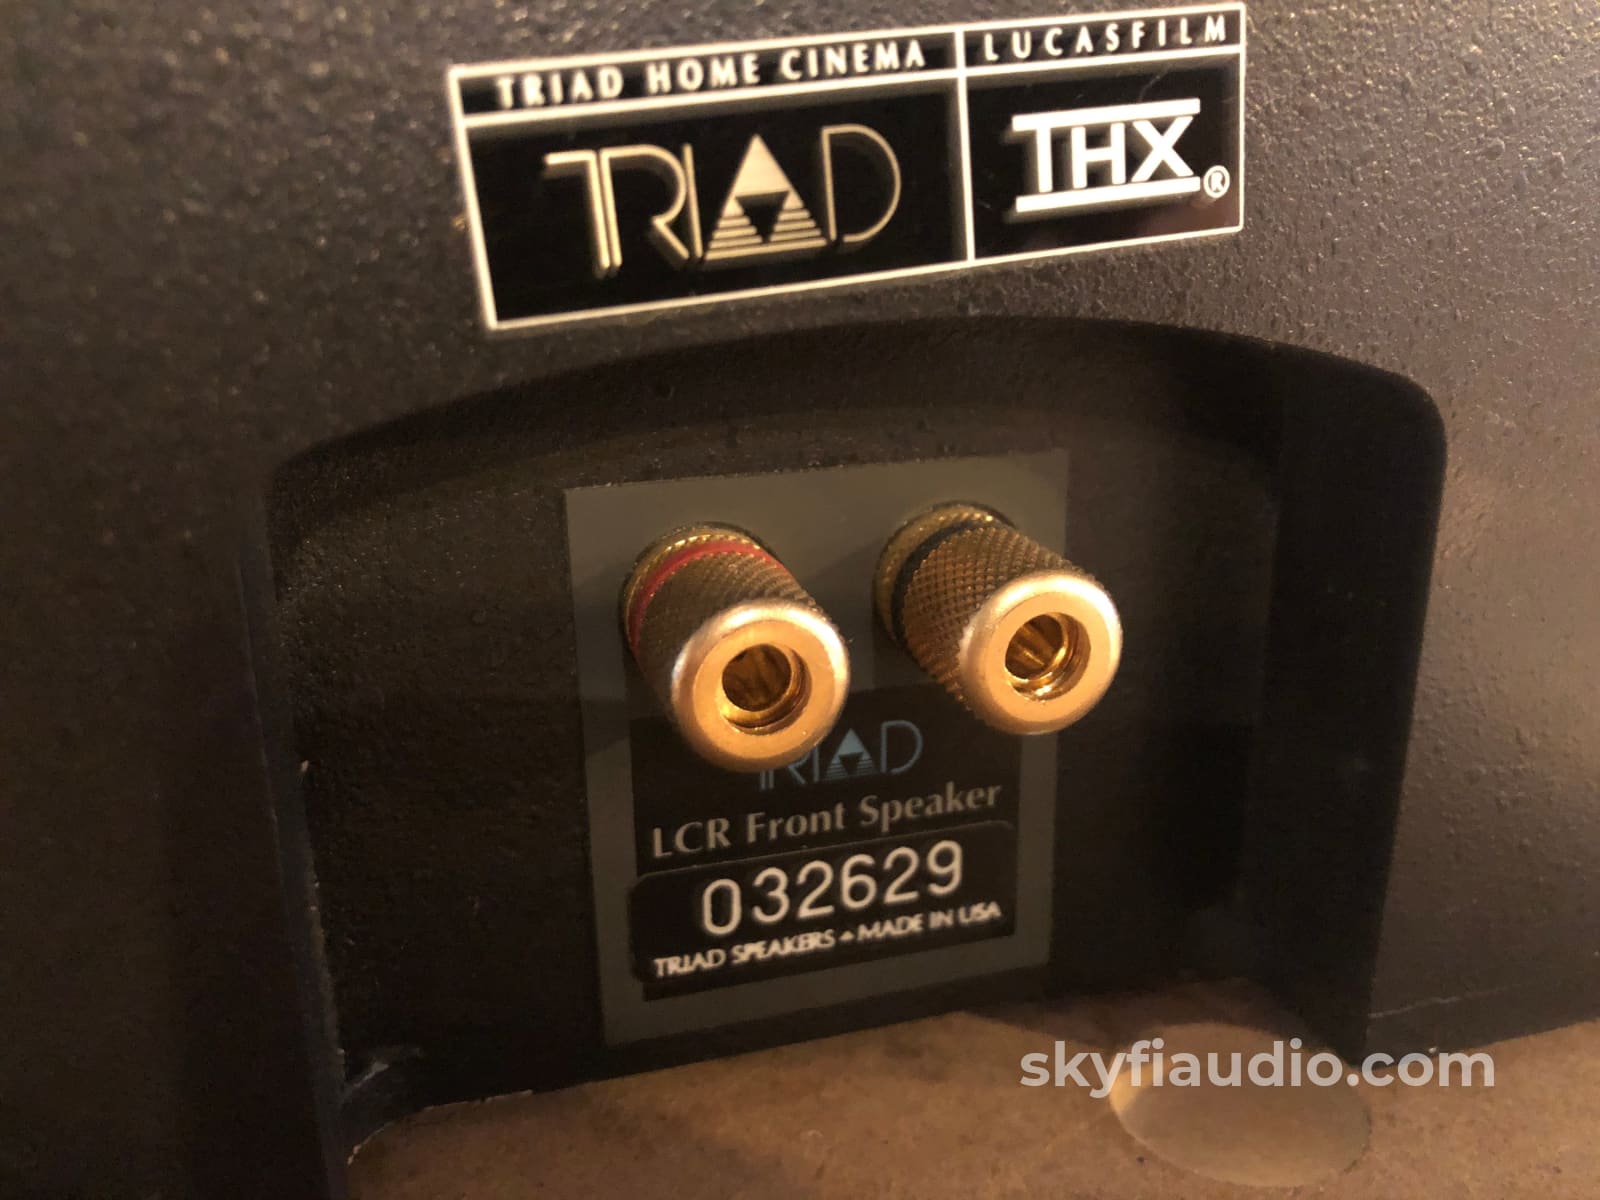 Triad Home Cinema Classic Lcr Speakers - Thx Rated